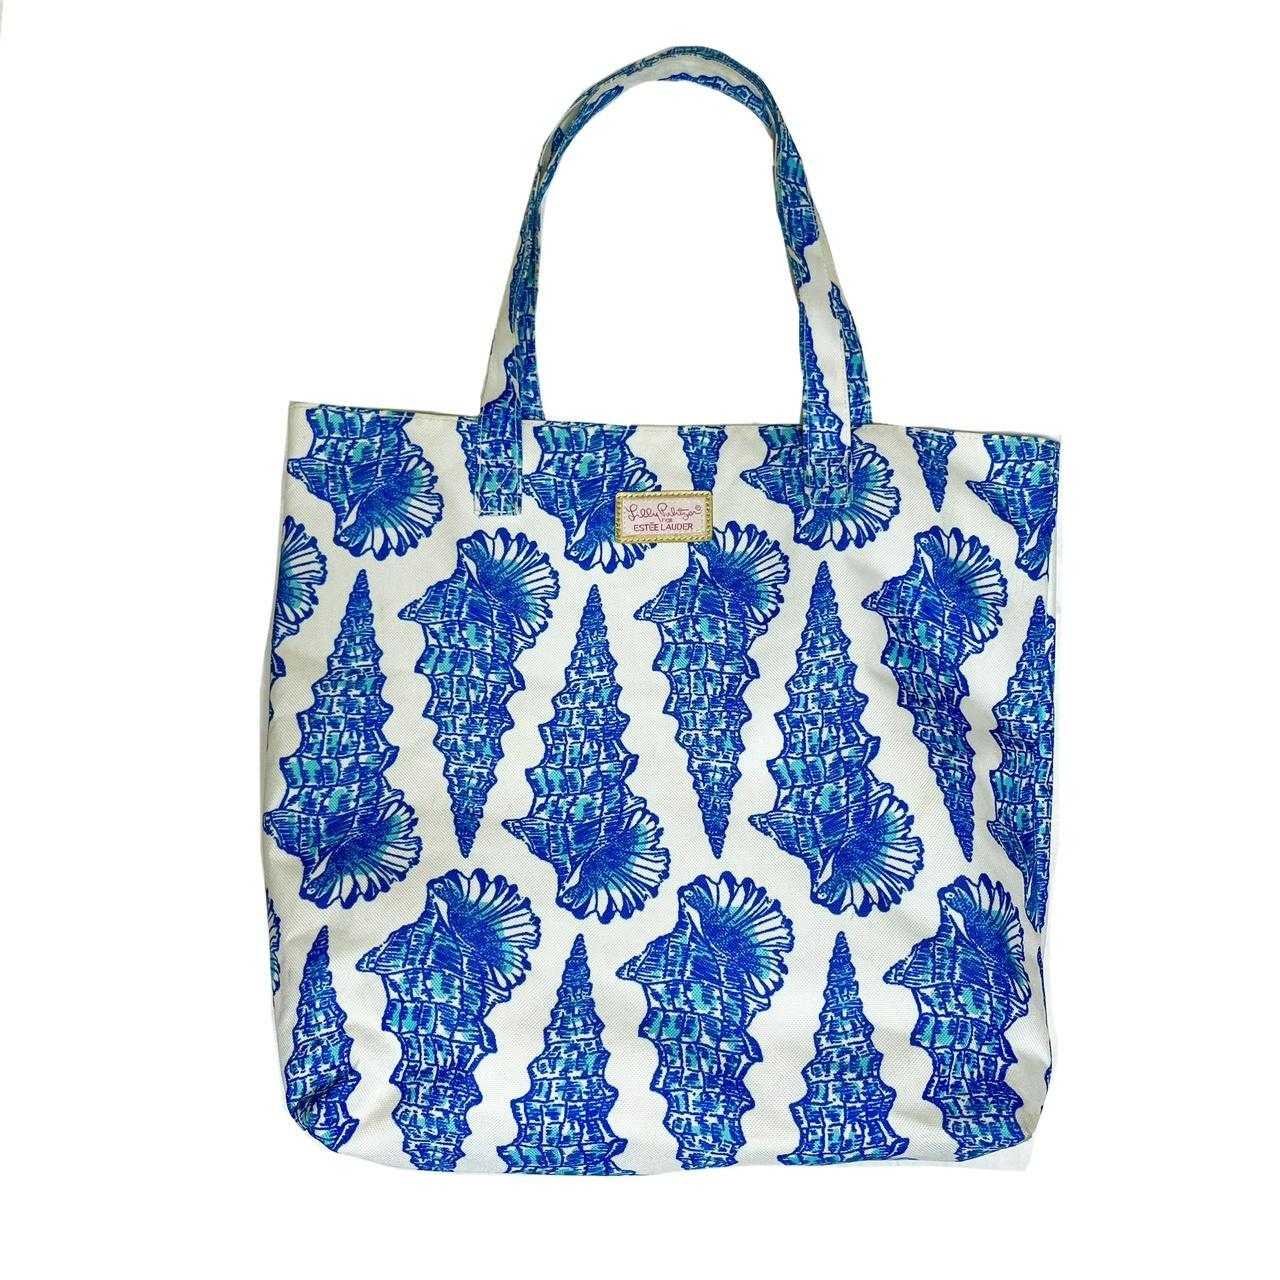 Lilly Pulitzer Women's White and Blue Bag